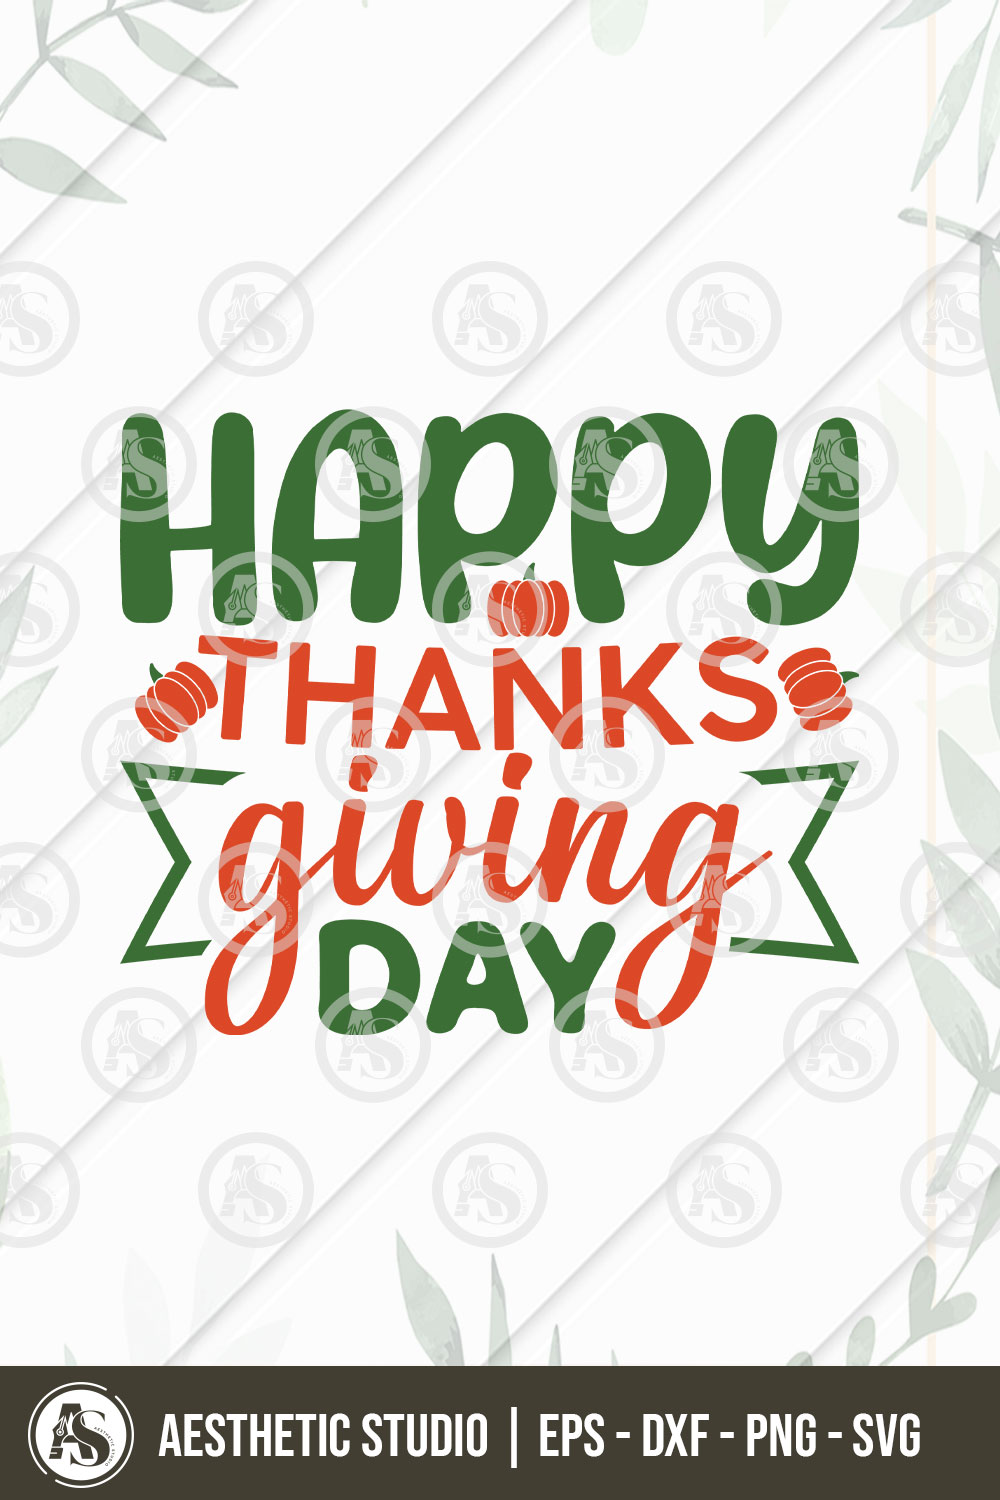 Happy Thanksgiving Day, Thanksgiving Svg, Fall Svg, Pumpkin, Thanksgiving Shirt Png Cut Files, Turkey svg, Gobble Svg, Pumpkin Spice, Fall Leaves Svg, Autumn Svg, Grateful svg, Thanksgiving Quote, Cut Files for Cricut, Thanksgiving Sayings, Svg, Dxg, Png, Eps pinterest preview image.